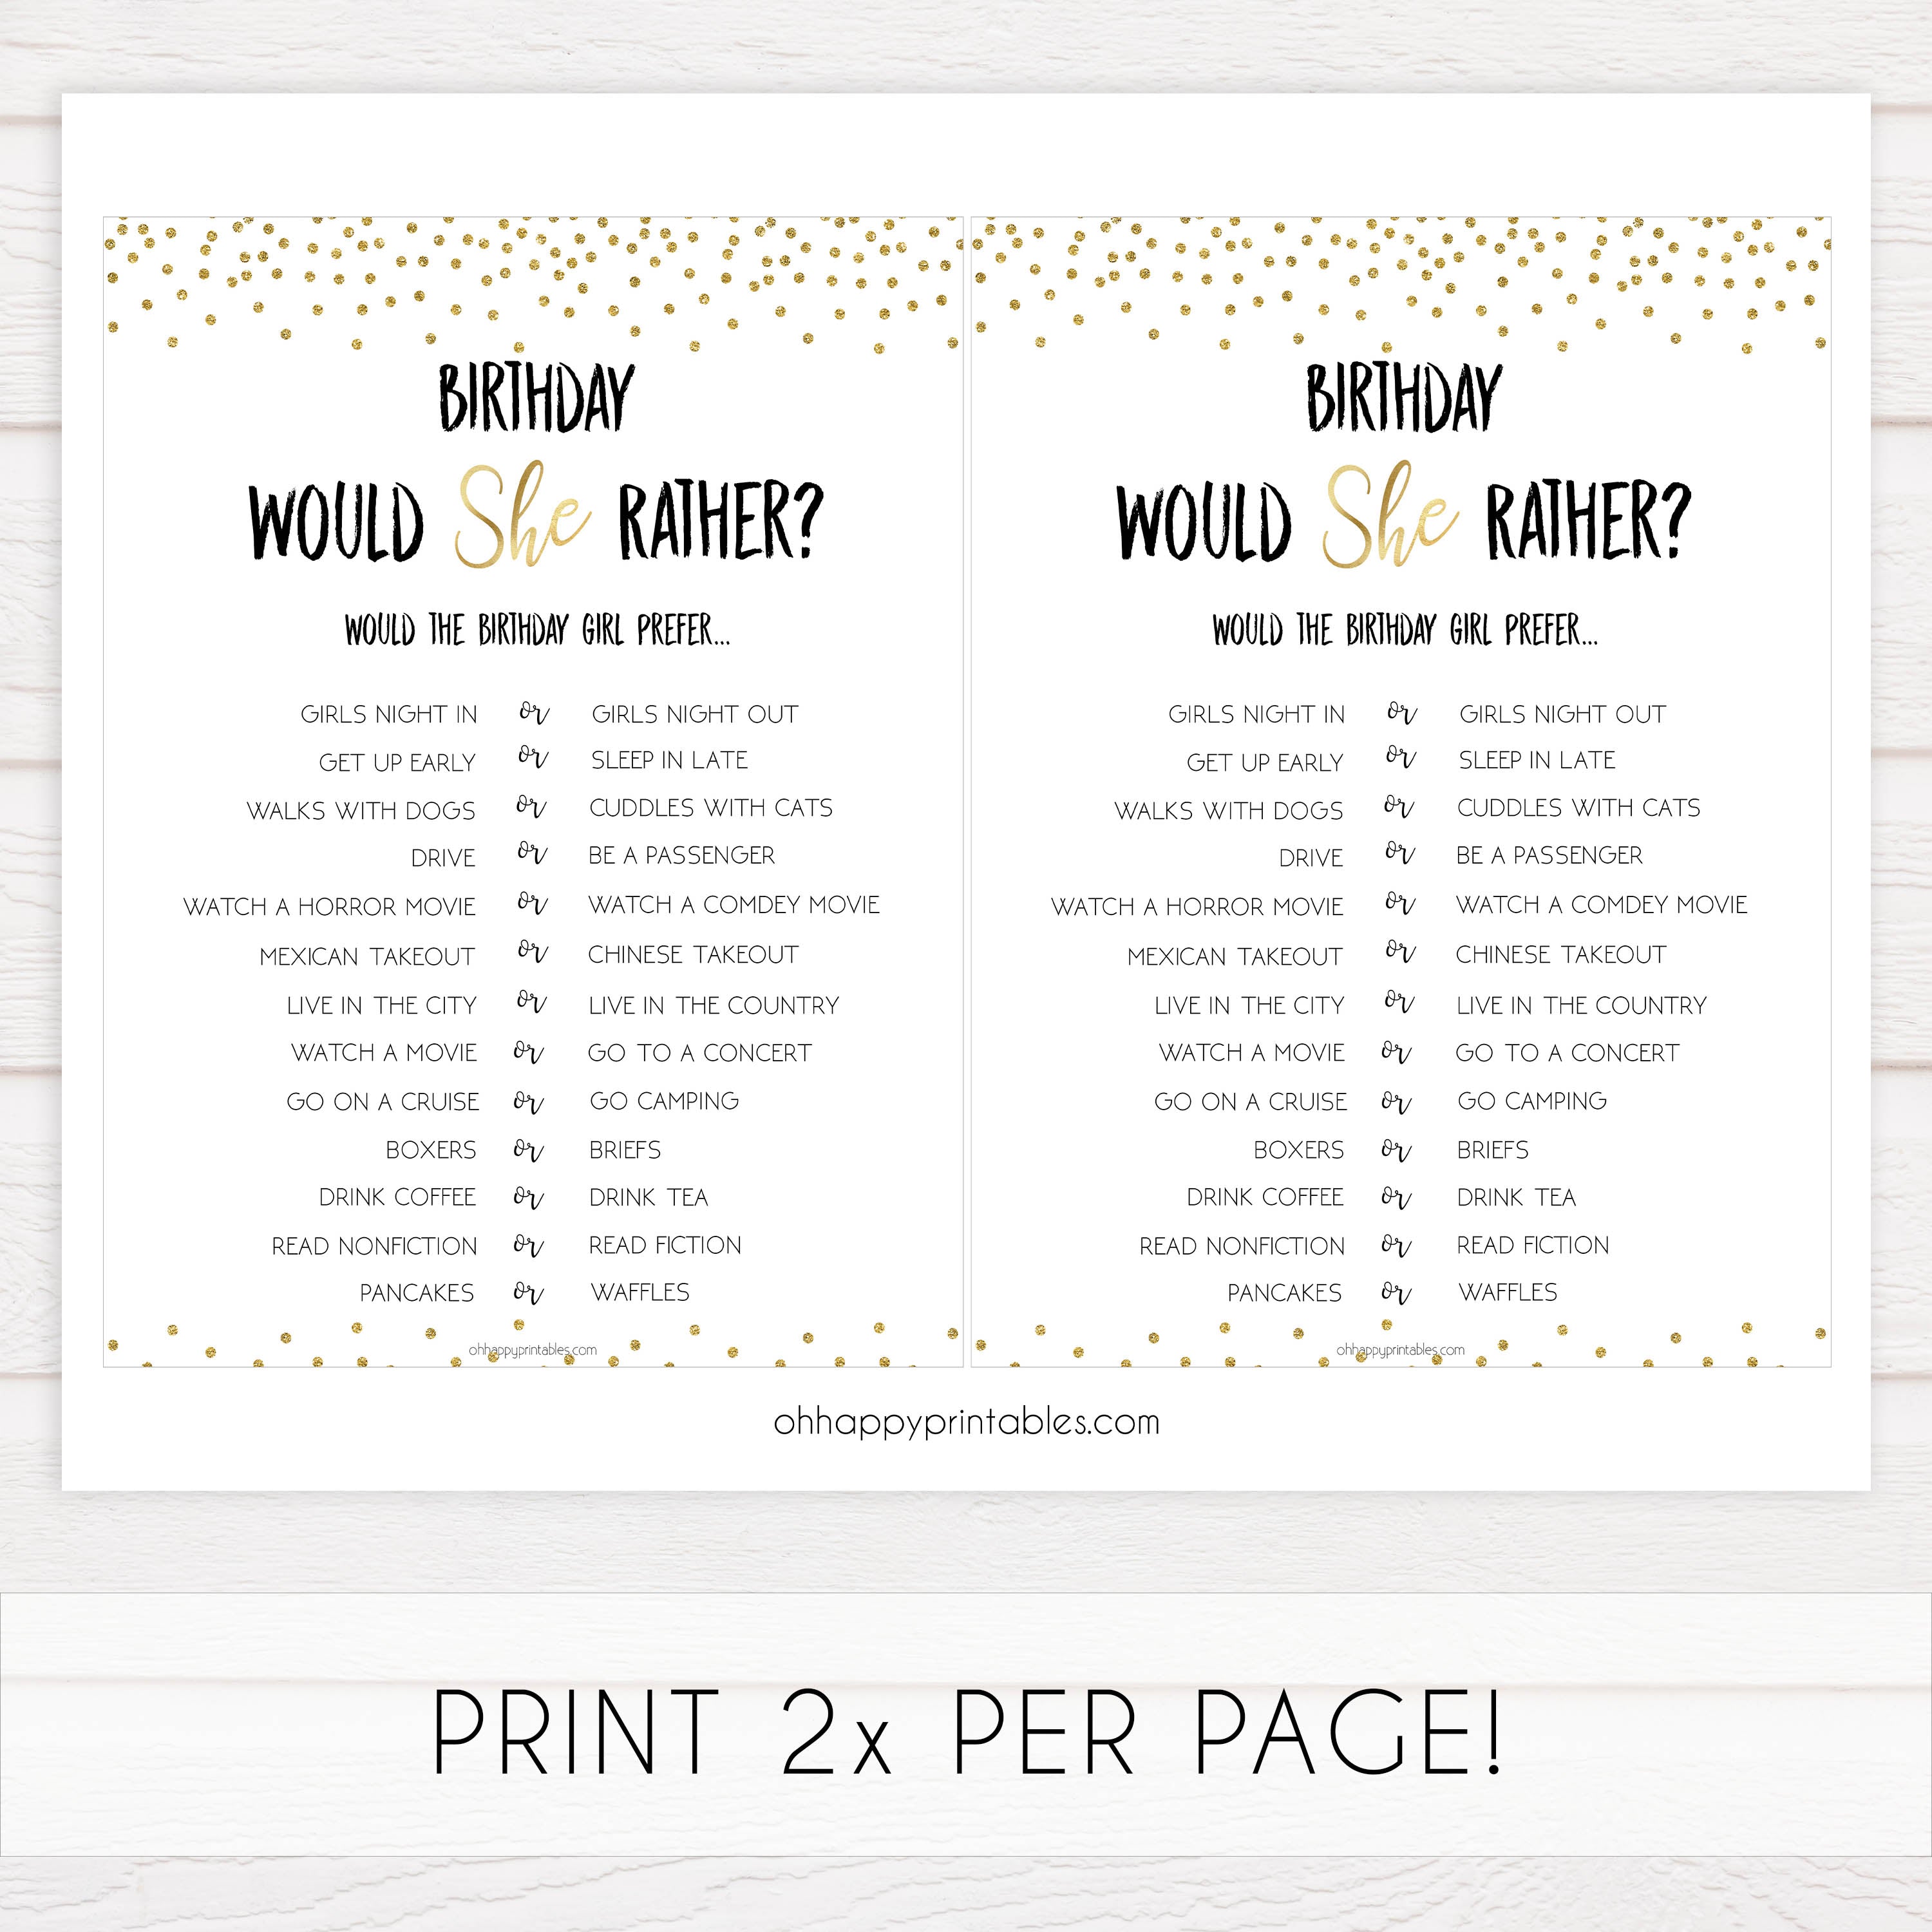 birthday would she rather, gold glitter birthday games, printable birthday games, fun birthday games, 30th birthday games, would she rather game